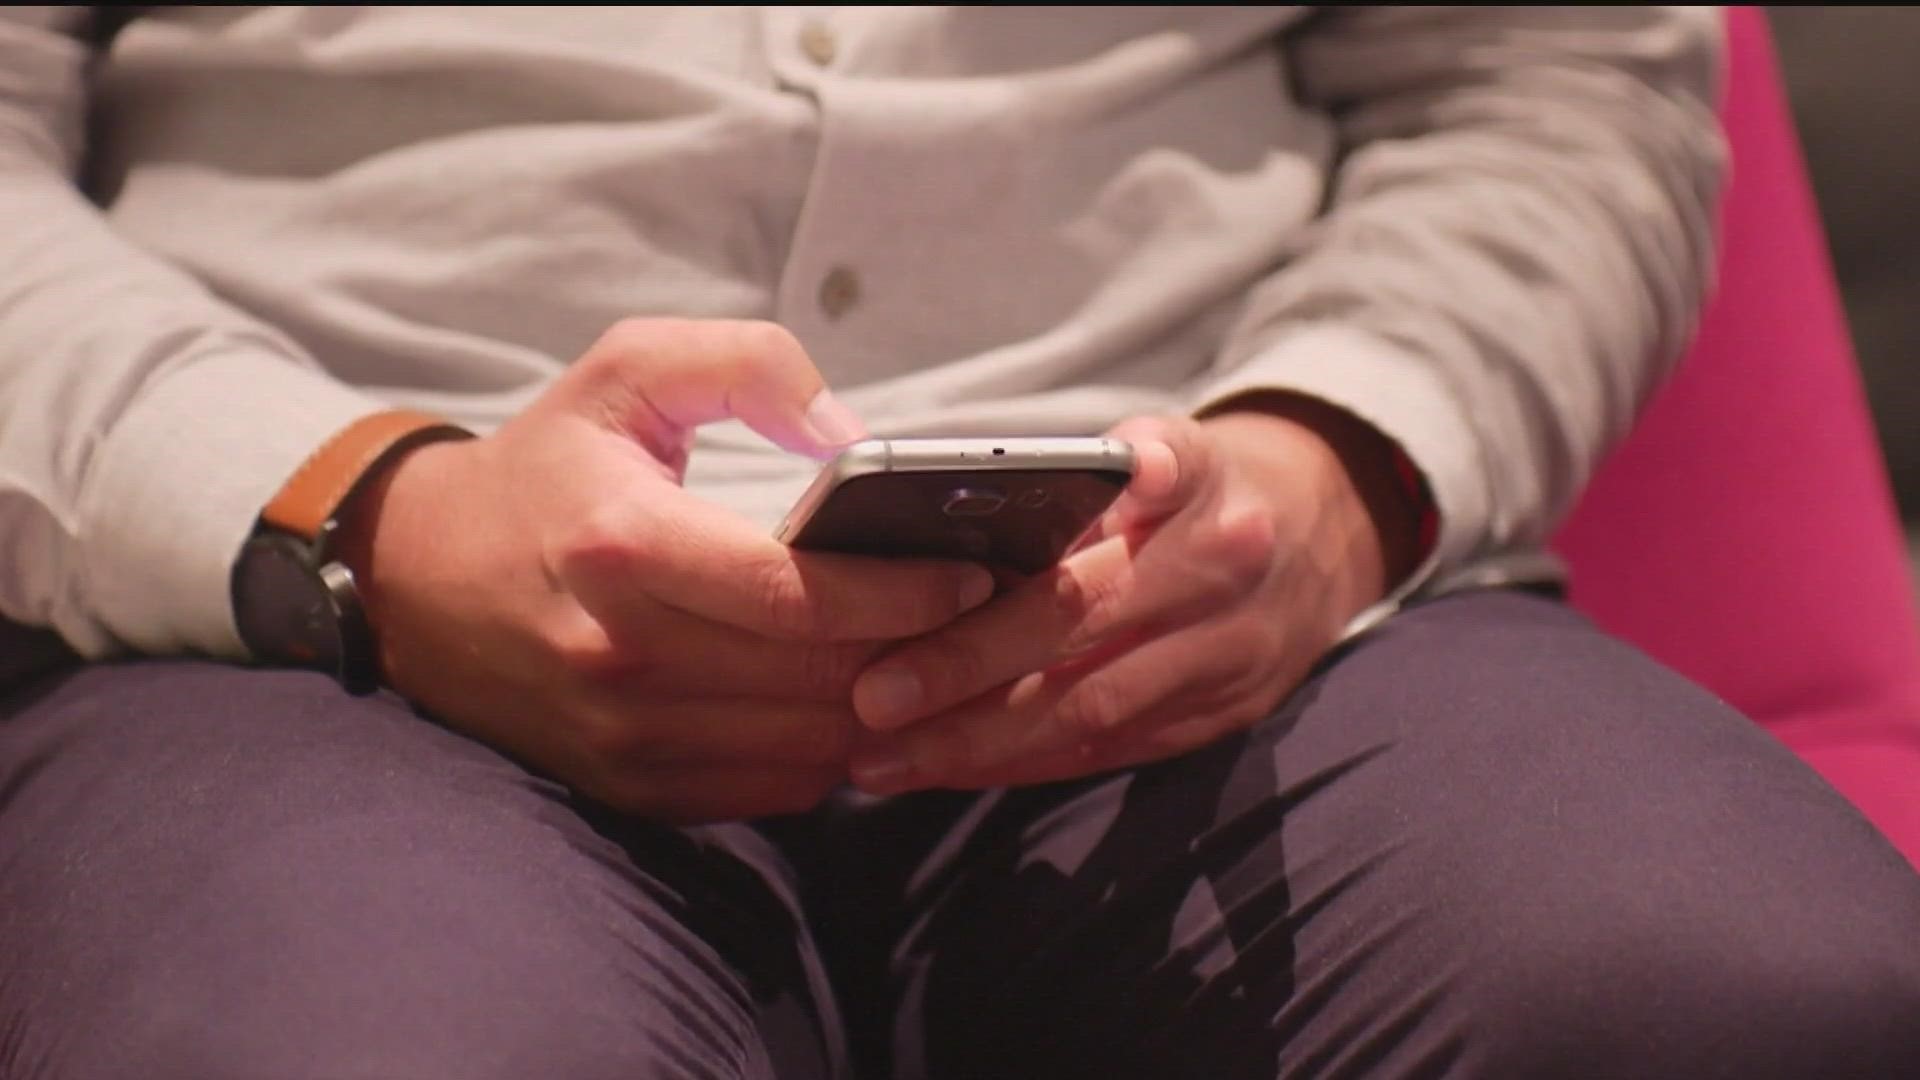 Many of the victims said they were using GRINDR, a dating app for gay men.